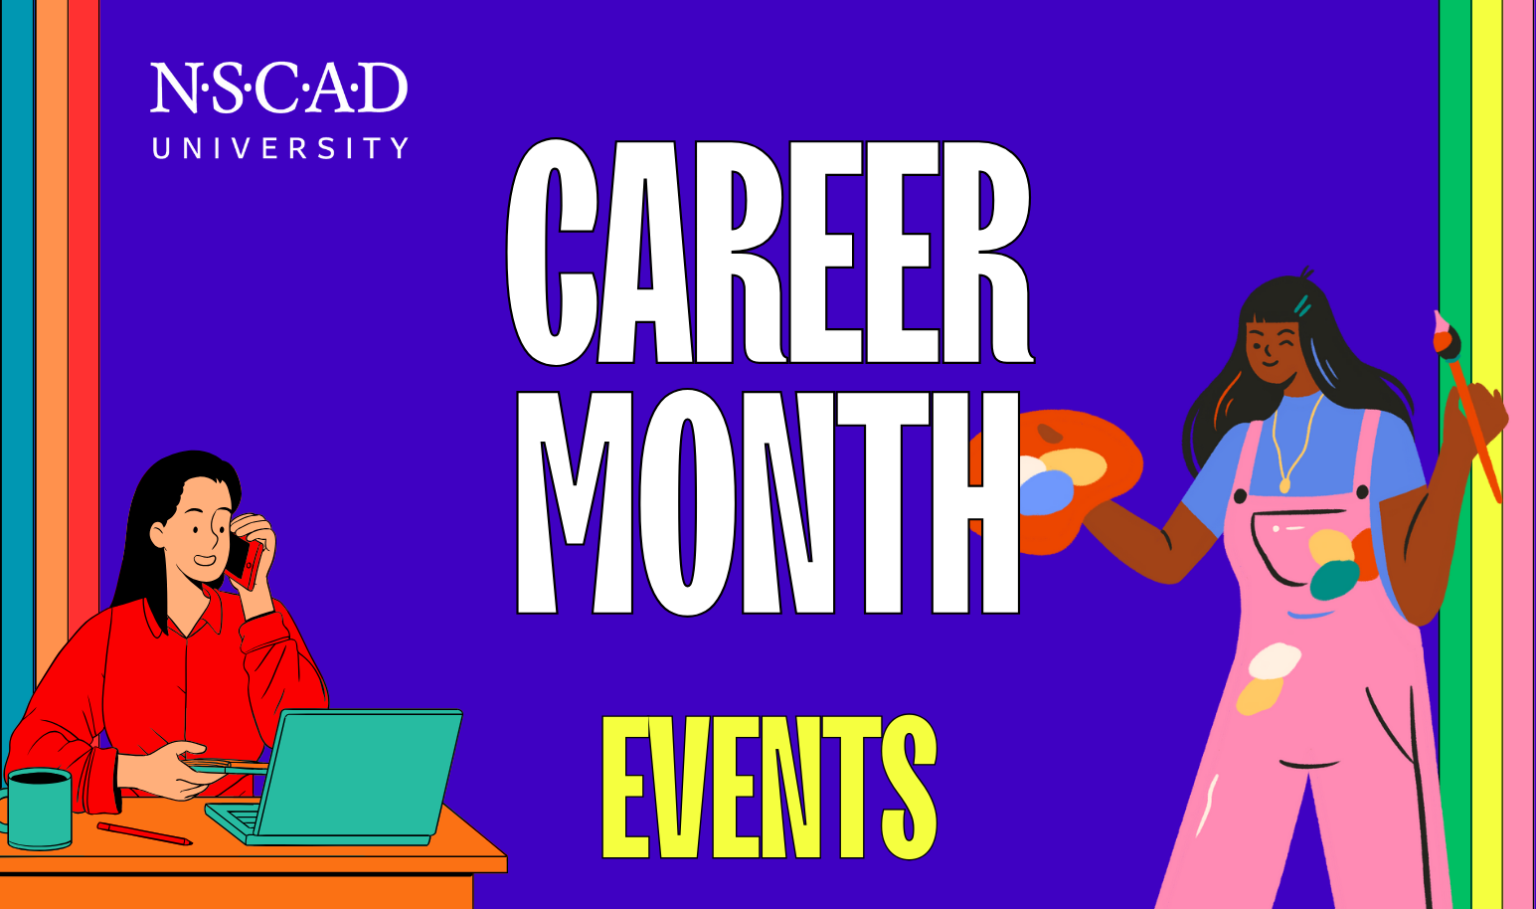 A poster for NSCAD Career Month with a blue background and an illustration of a light-skinned person with long black hair and a red shirt at a desk looking at their laptop while talking on the phone and a second illustration of a brown-skinned person with long black hair standing with a paint palette and paintbrush winking. The text on the poster reads: “NSCAD UNIVERSITY CAREER MONTH EVENTS